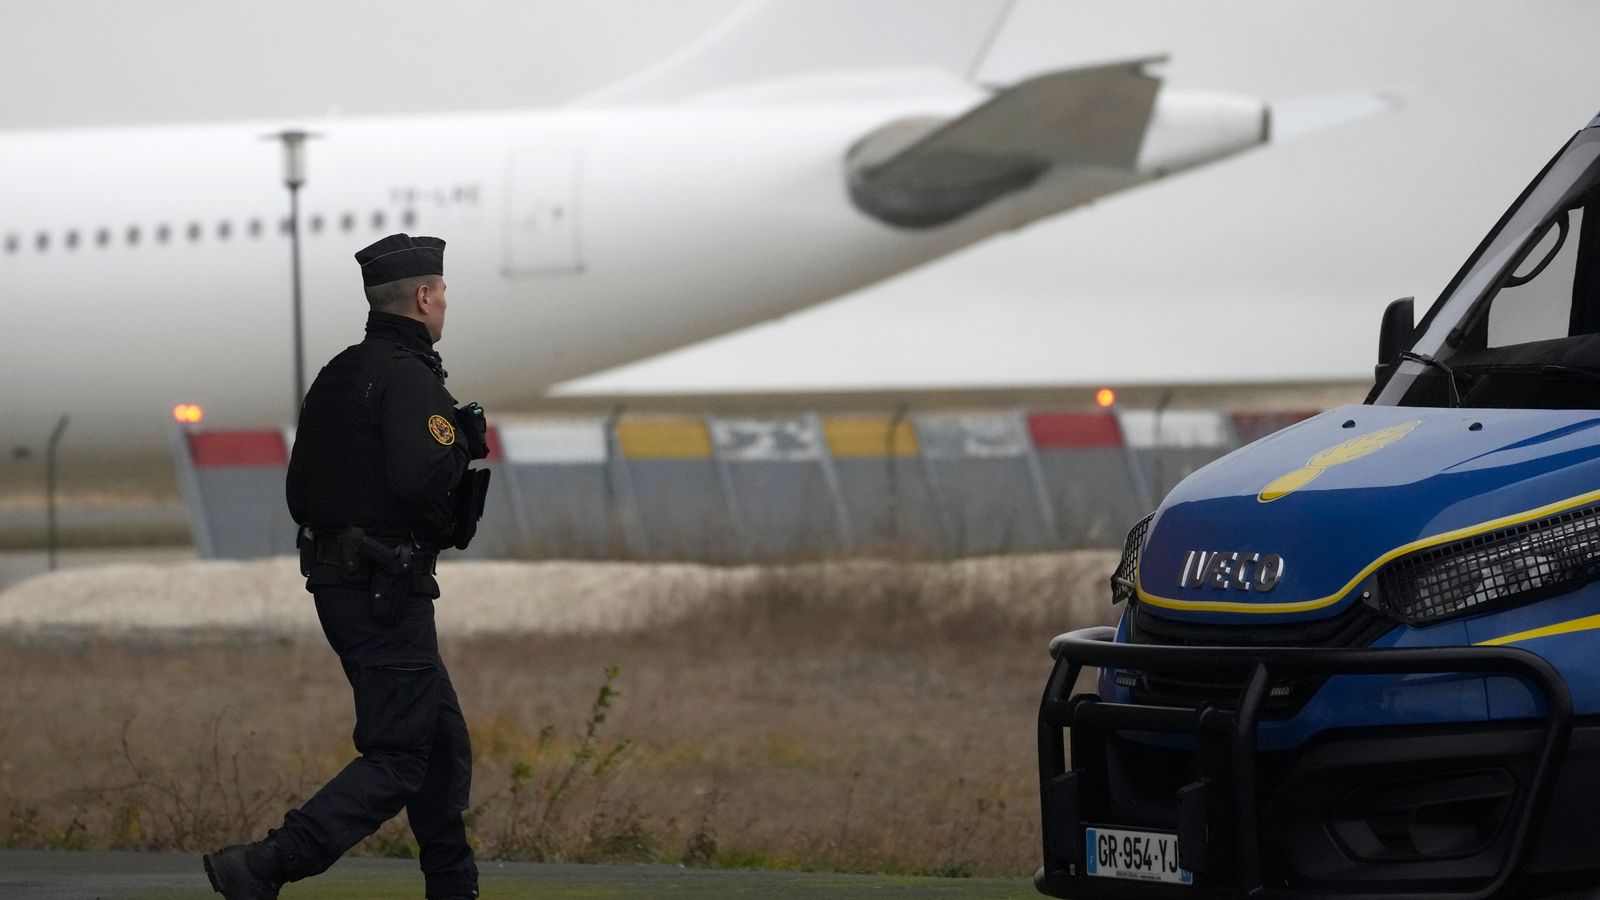 Two detained on suspected human trafficking after plane carrying hundreds of Indian citizens grounded in France